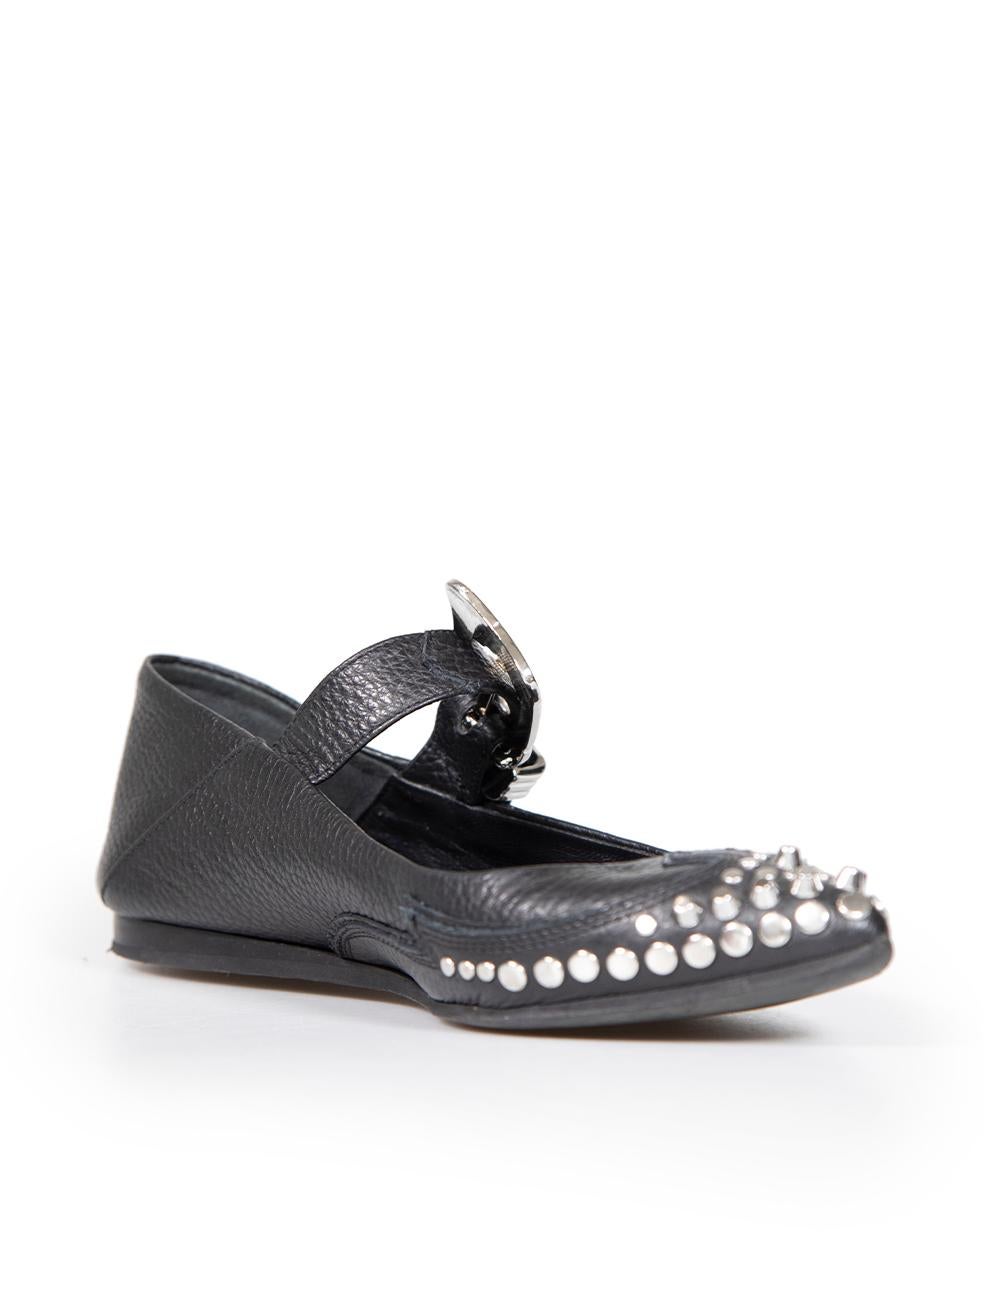 CONDITION is Very good. Minimal wear to shoes is evident. Minimal wear to the soles and outer-soles with abrasions and indents on this used McQ designer resale item.
 
 
 
 Details
 
 
 Black
 
 Leather
 
 Flats
 
 Point toe
 
 Buckle fastening
 
